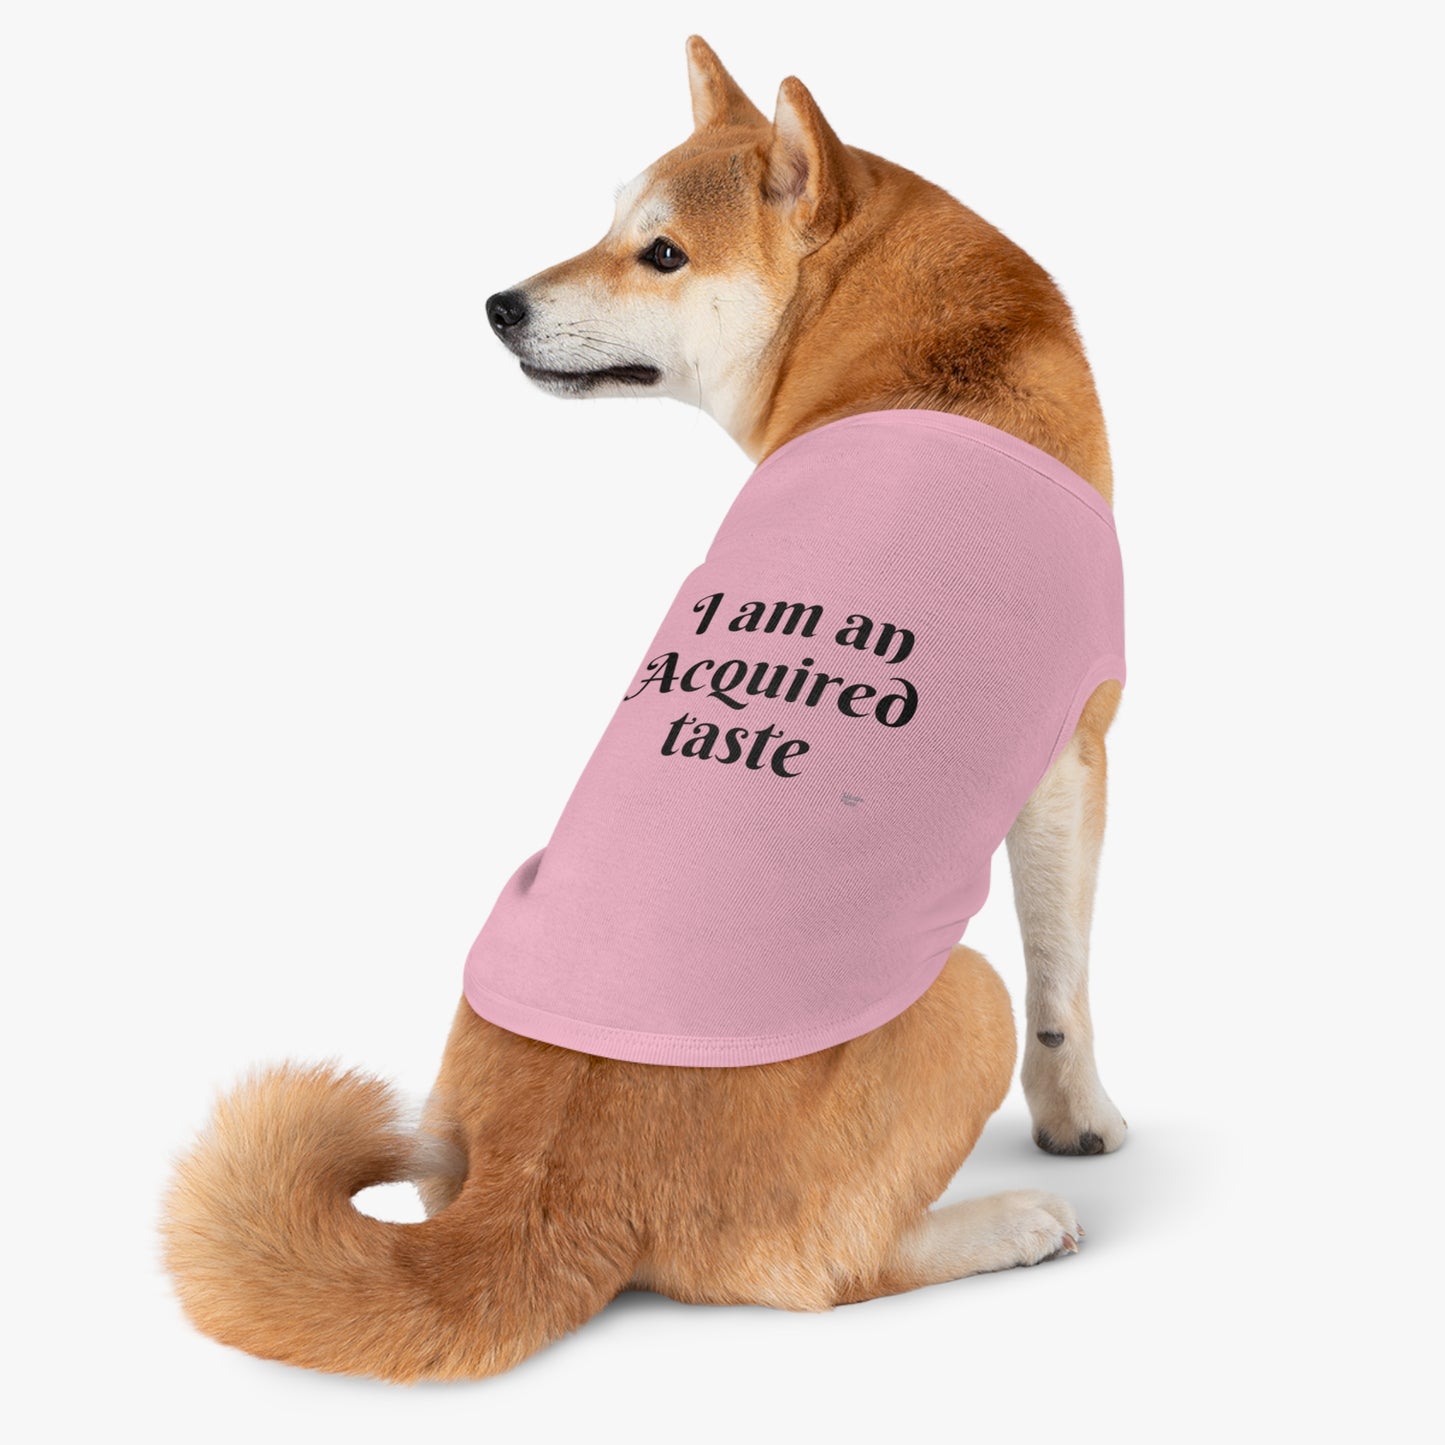 I'm an Acquired Taste Pet Tank Top - Unique and Expressive Pet Apparel